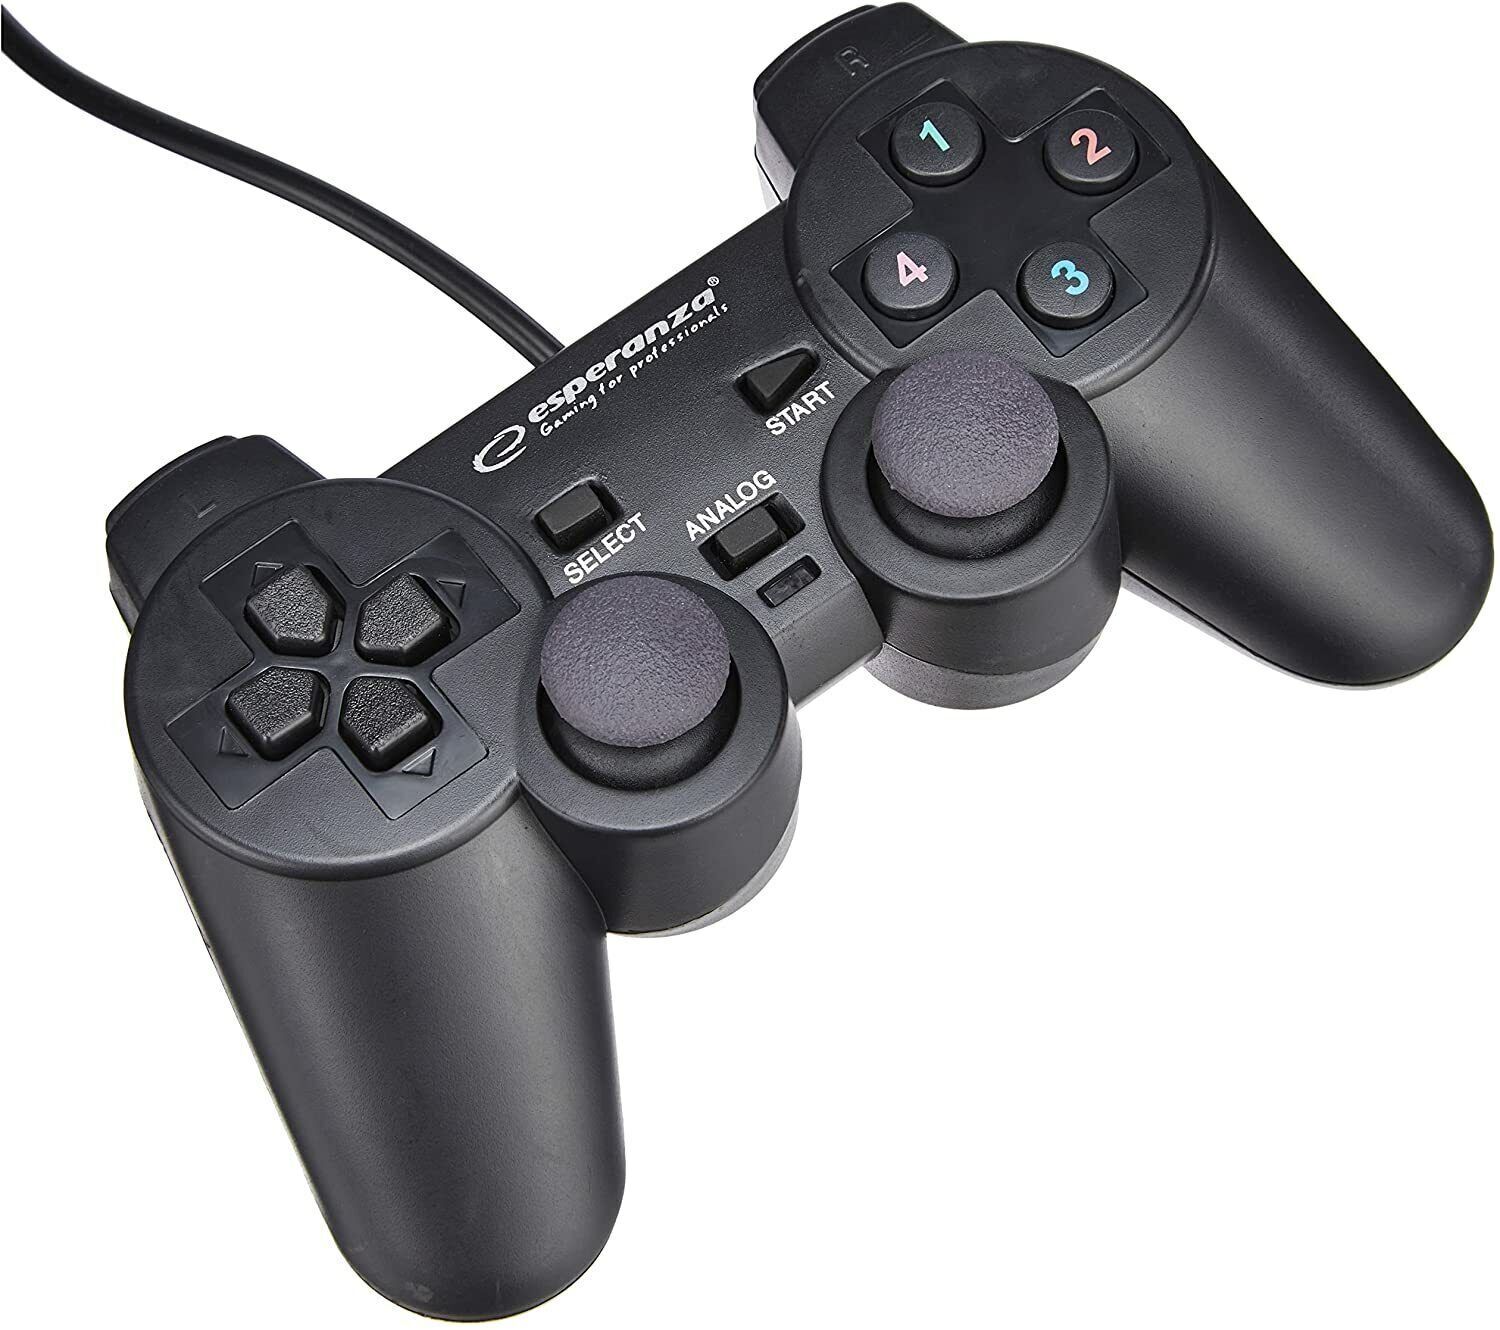 Wired Joypad Gamepad Controller Joystick Controller with Vibration for PC